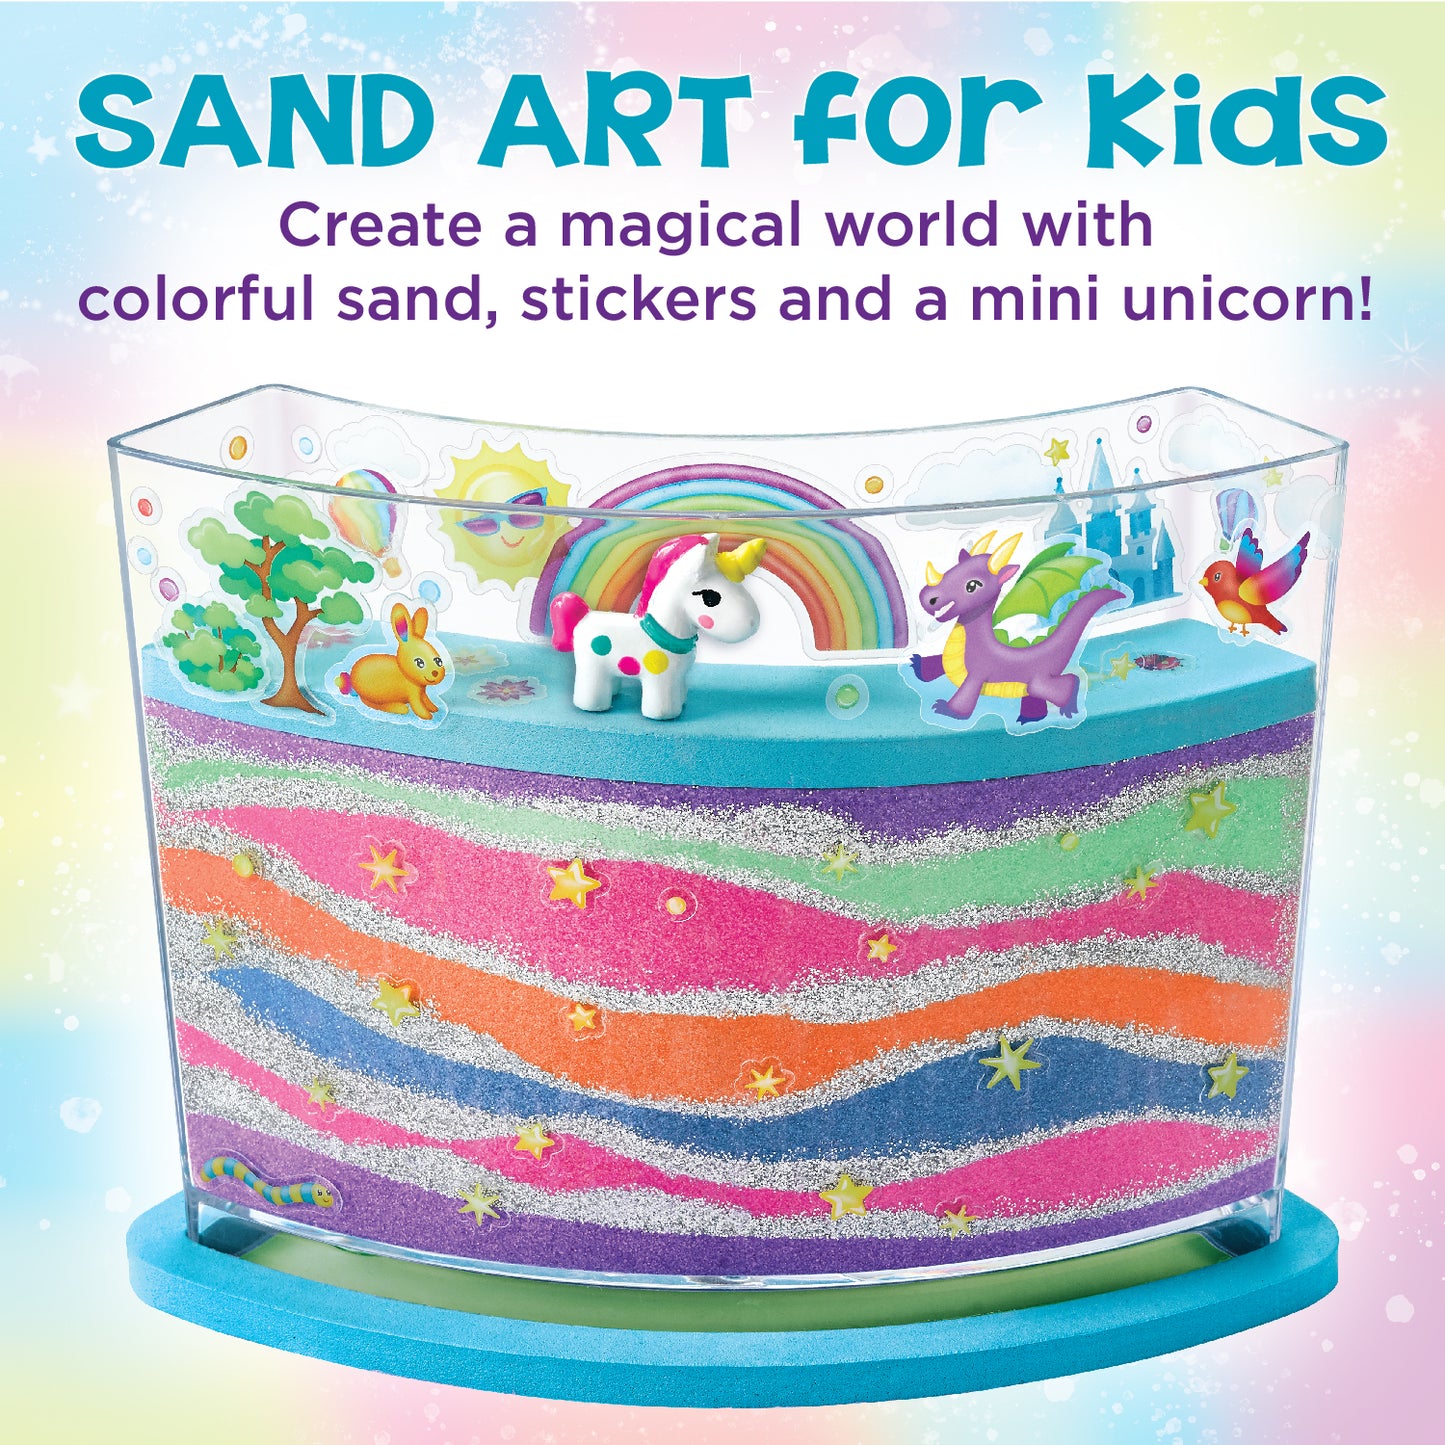 sand art for kids by faber castell- create a magical world with colourful sand and a mini unicorn